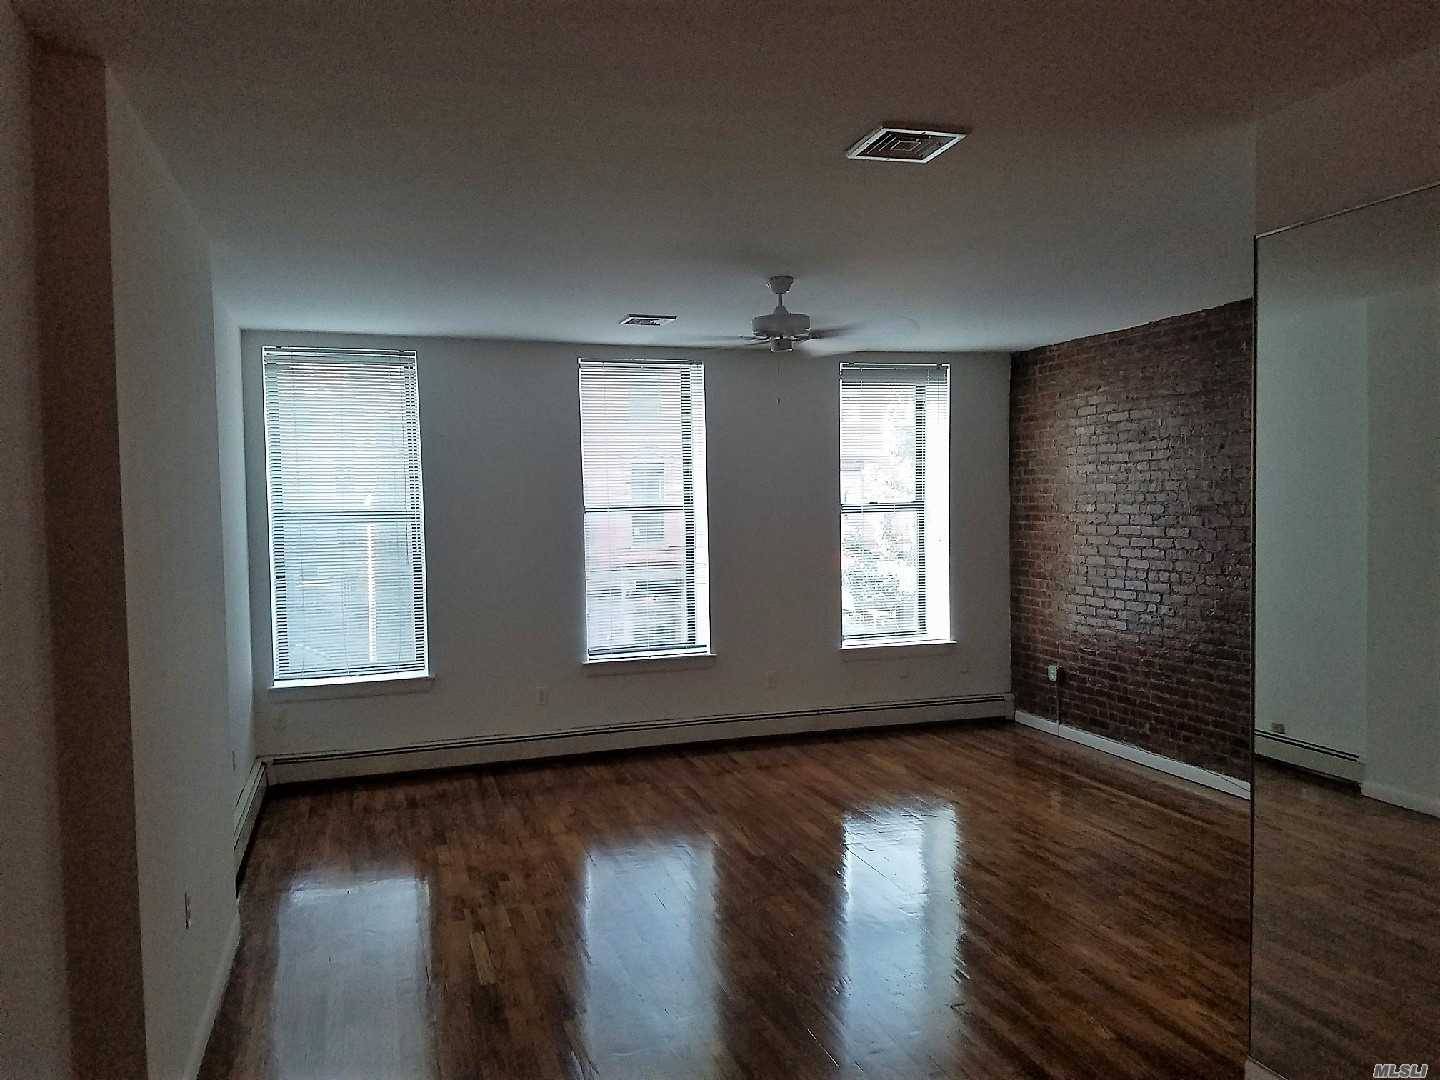 Charming, Newly Renovated, Large One Bedroom Apartment Located On The 3rd Floor In A Historic Brownstone.